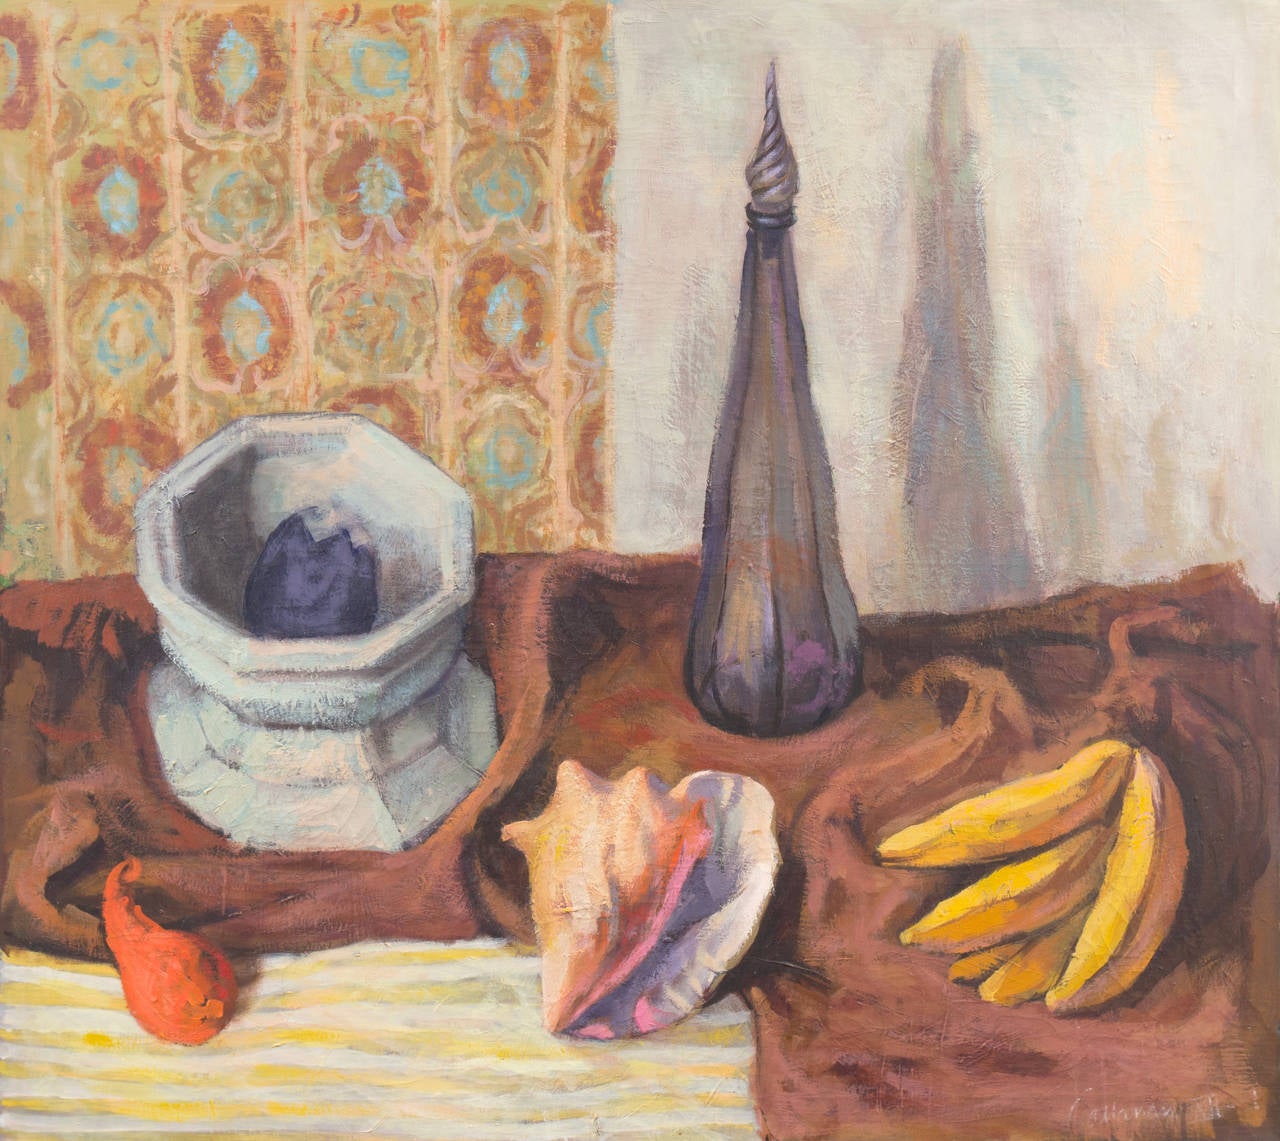 'Still Life with Conch Shell', Large Mid-Century American Post Impressionist Oil